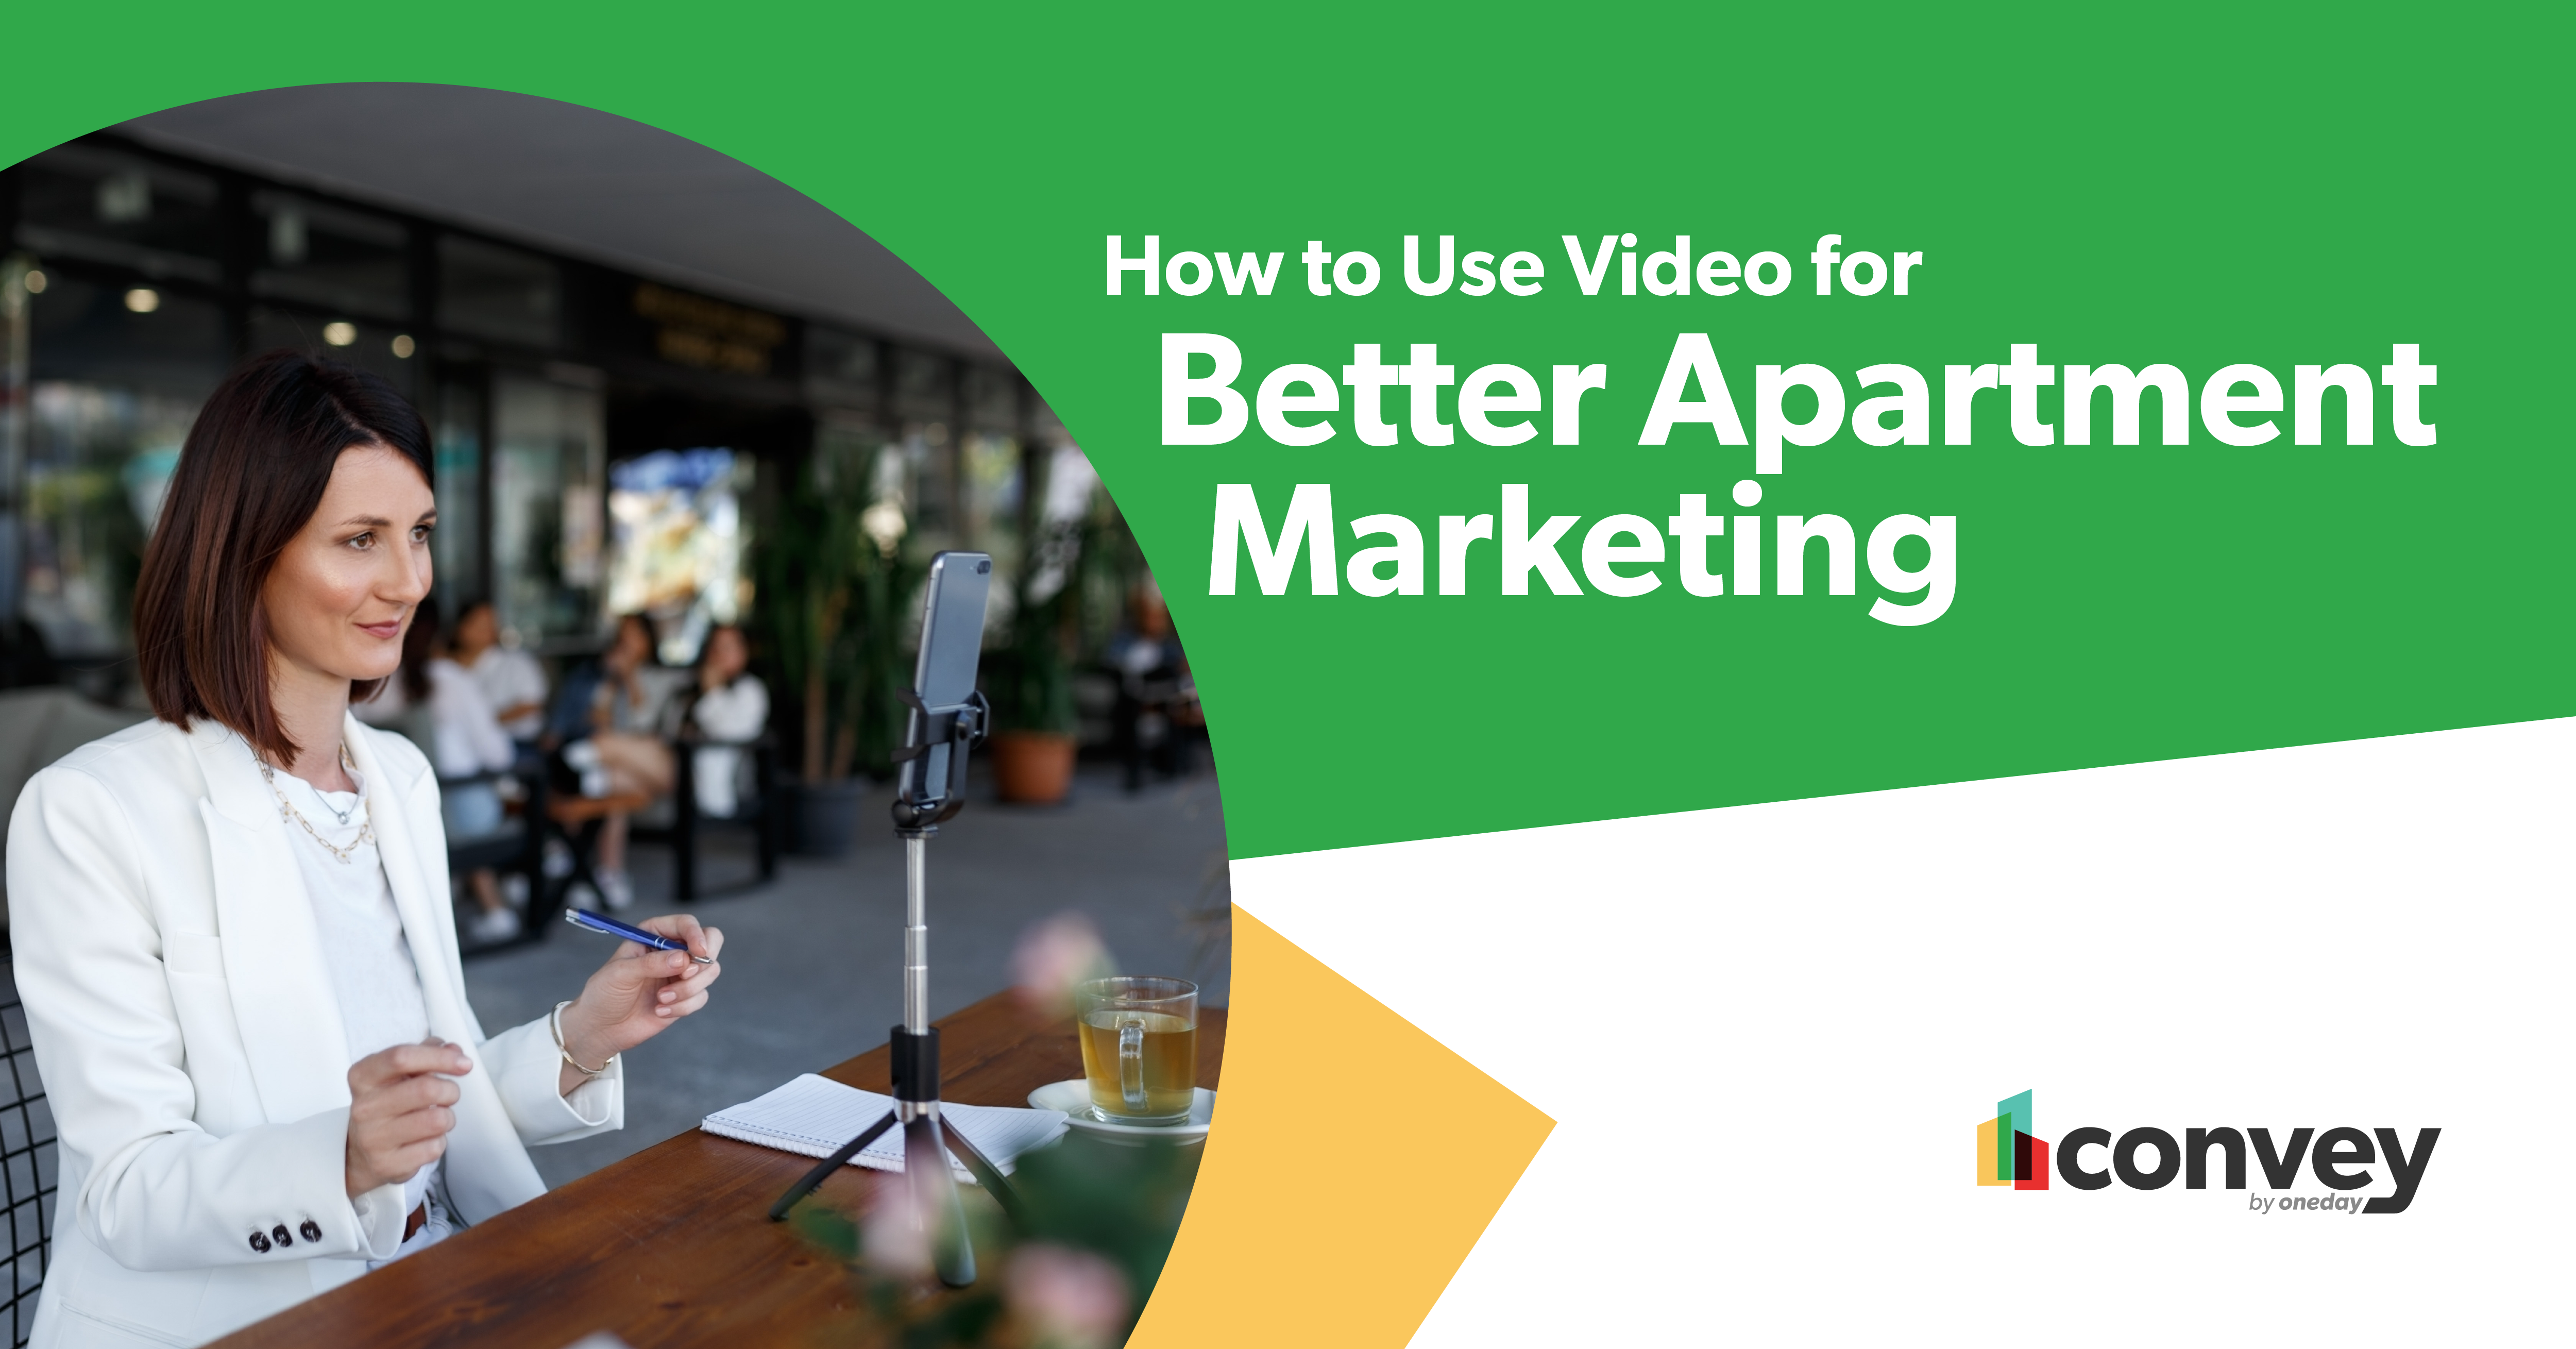 A look at some simple ways owners and operators in the multifamily industry can use video content to improve their apartment marketing strategies.